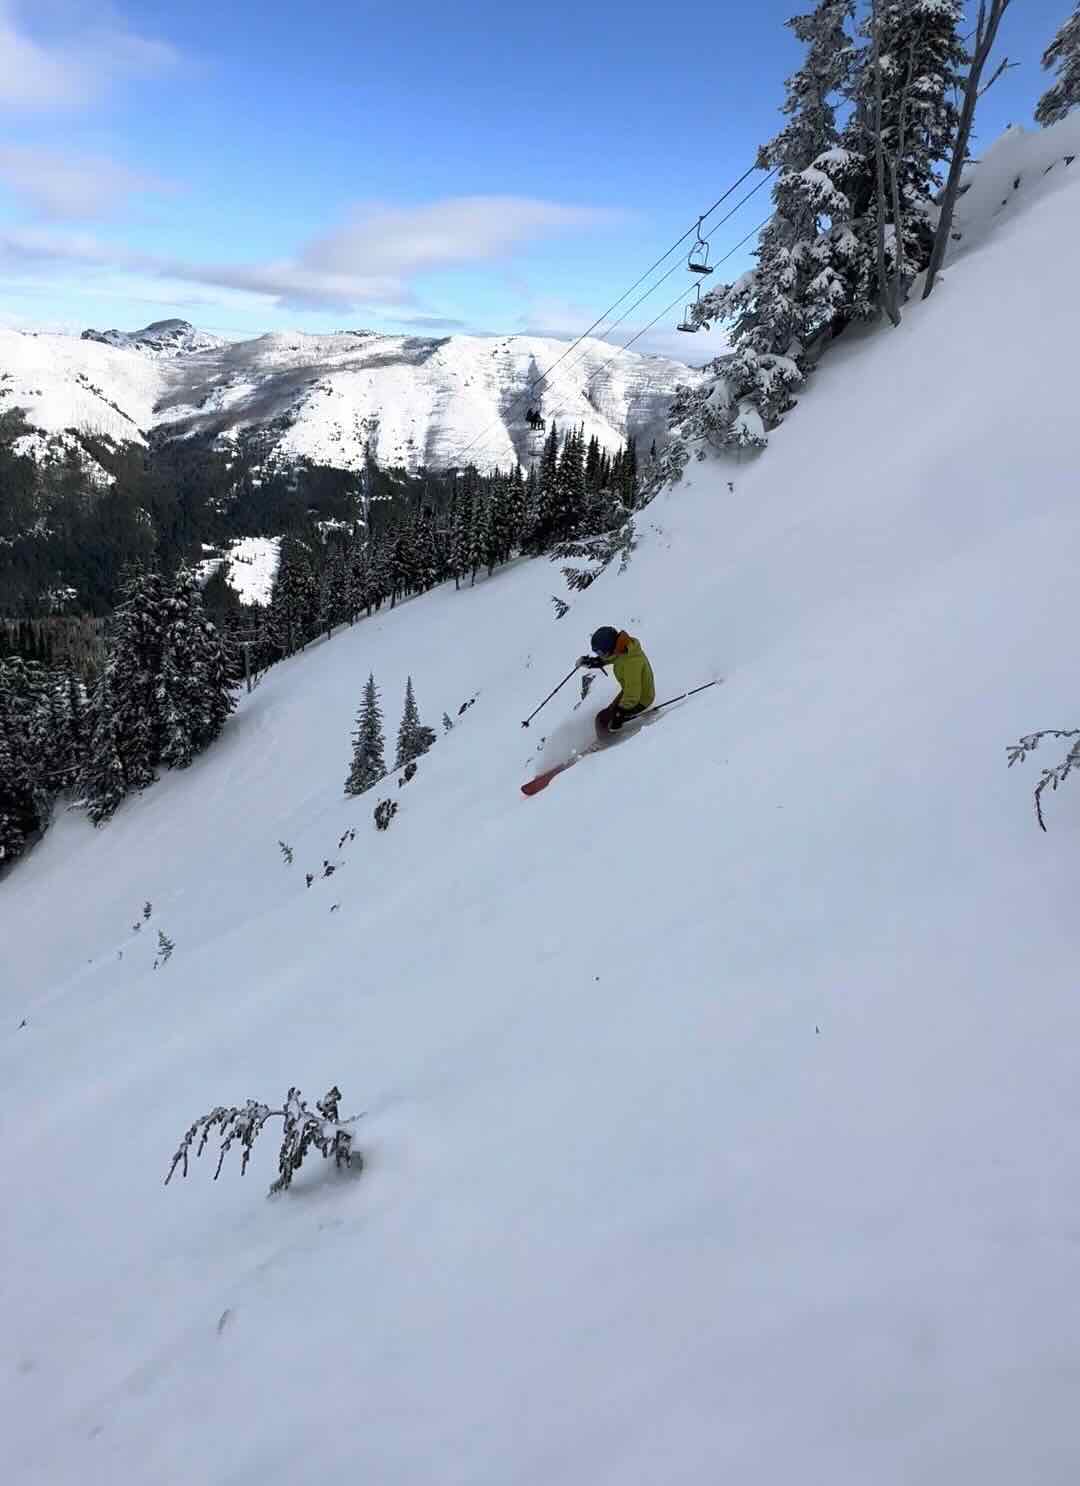 Anson skiing near northway chair lift